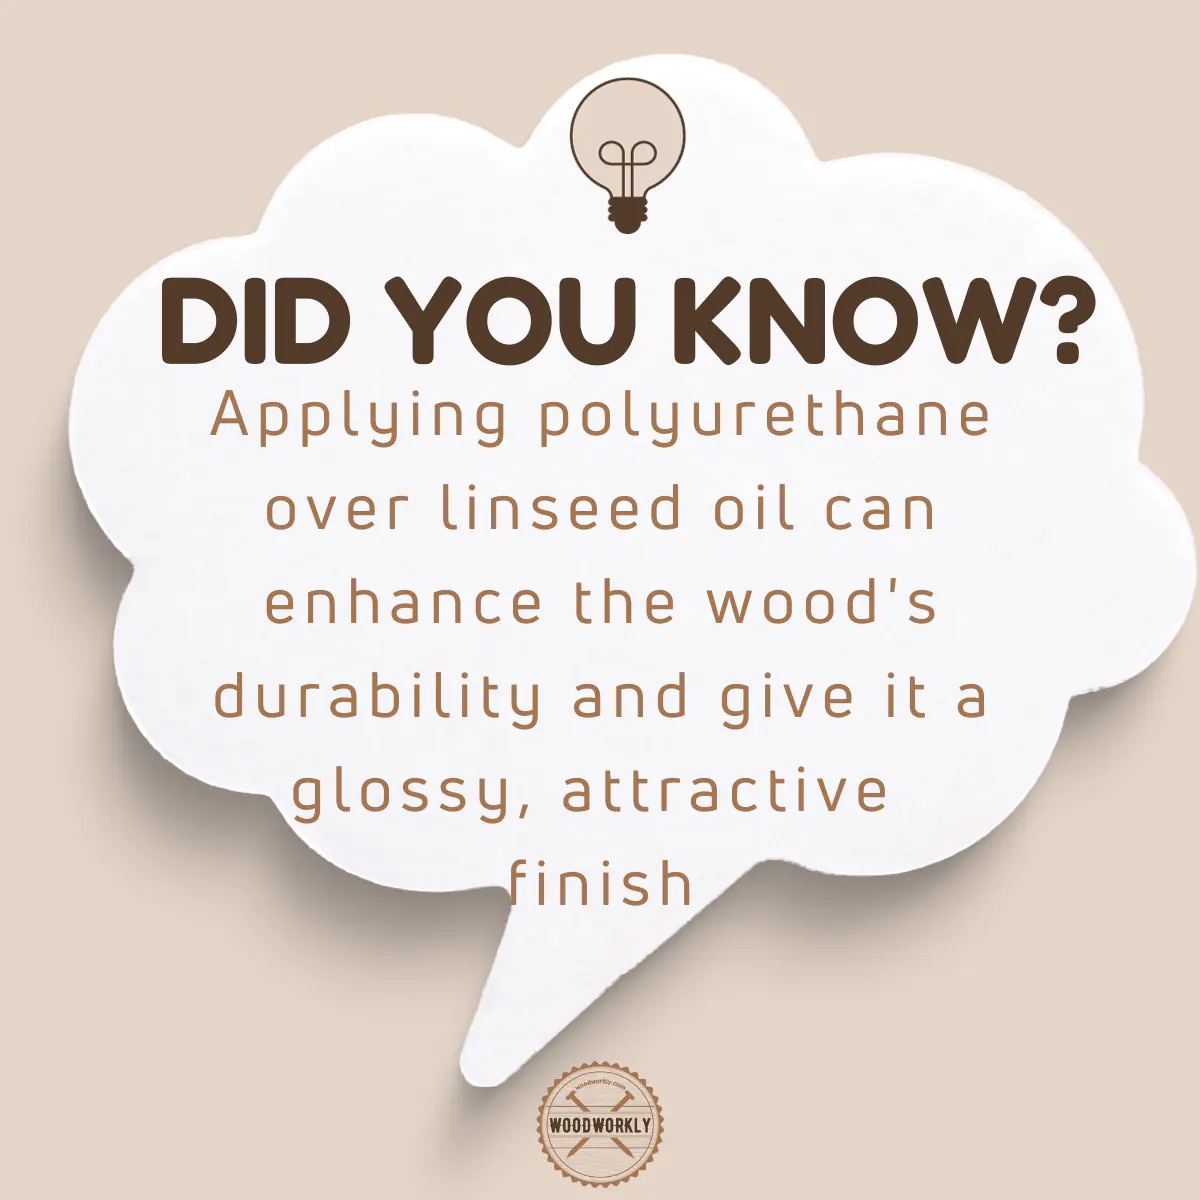 Did you know fact about polyurethane over linseed oil